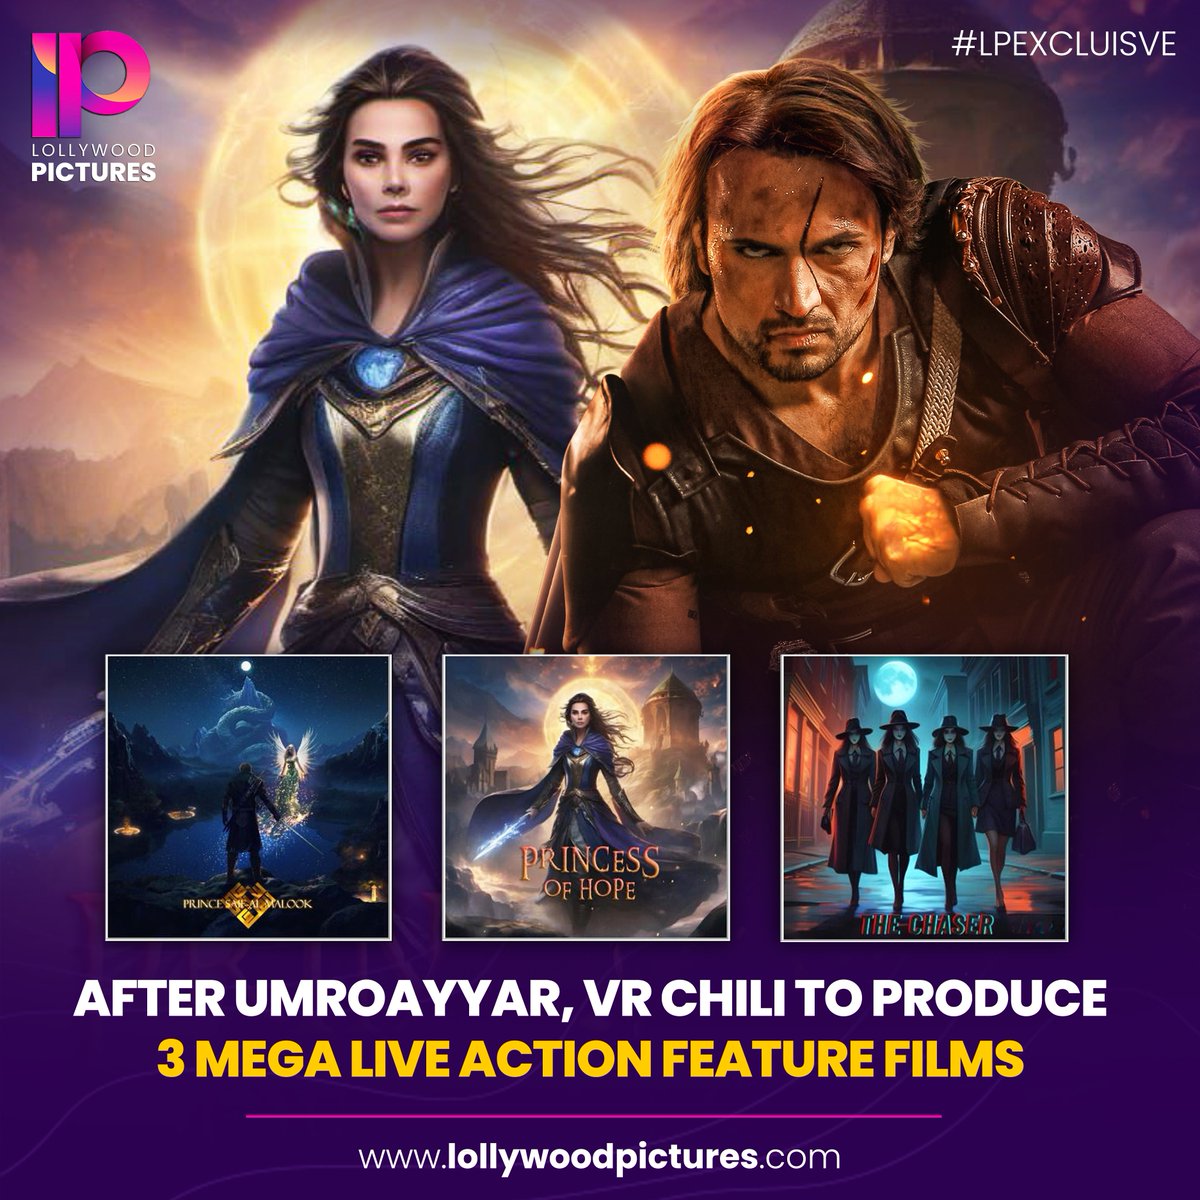 Big news for Pakistani cinema!

VR Chilli Productions, producers of 'Umro Ayyar', is making three live-action feature films based on the legendary Prince of Egypt, #SaifAlMalook'. The films are titled #PrinceSaifAlMalook, #ThePrincessofHope, and #TheChaser.